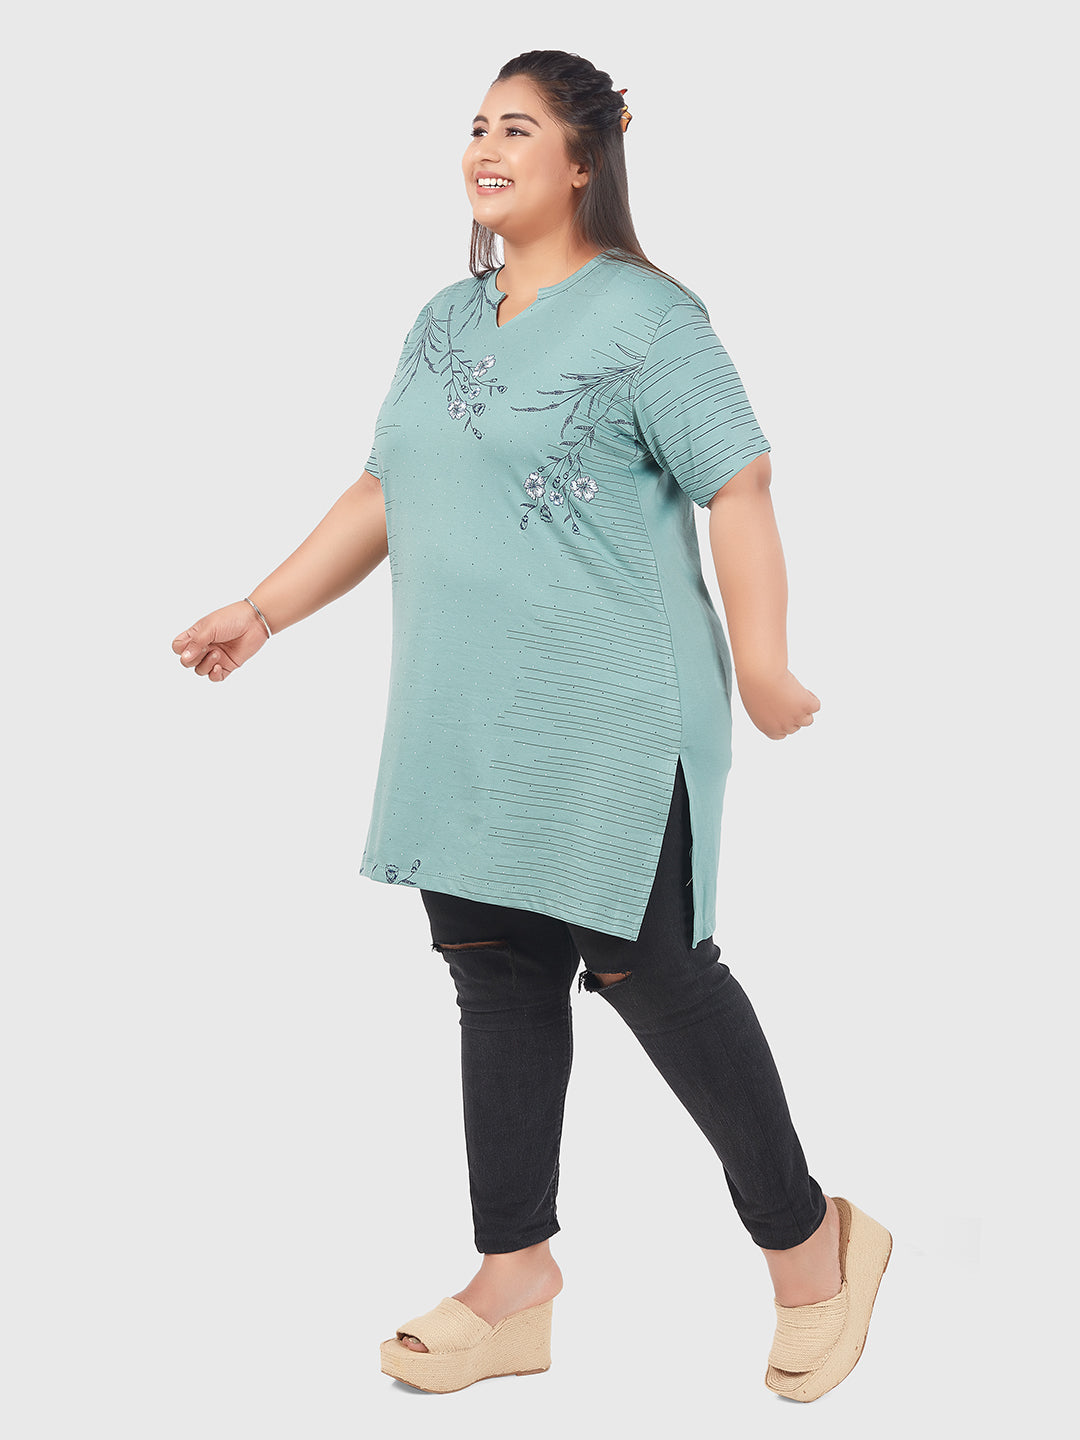 Comfortable Sage Half Sleeves Printed Long Tops For Women In Plus Size